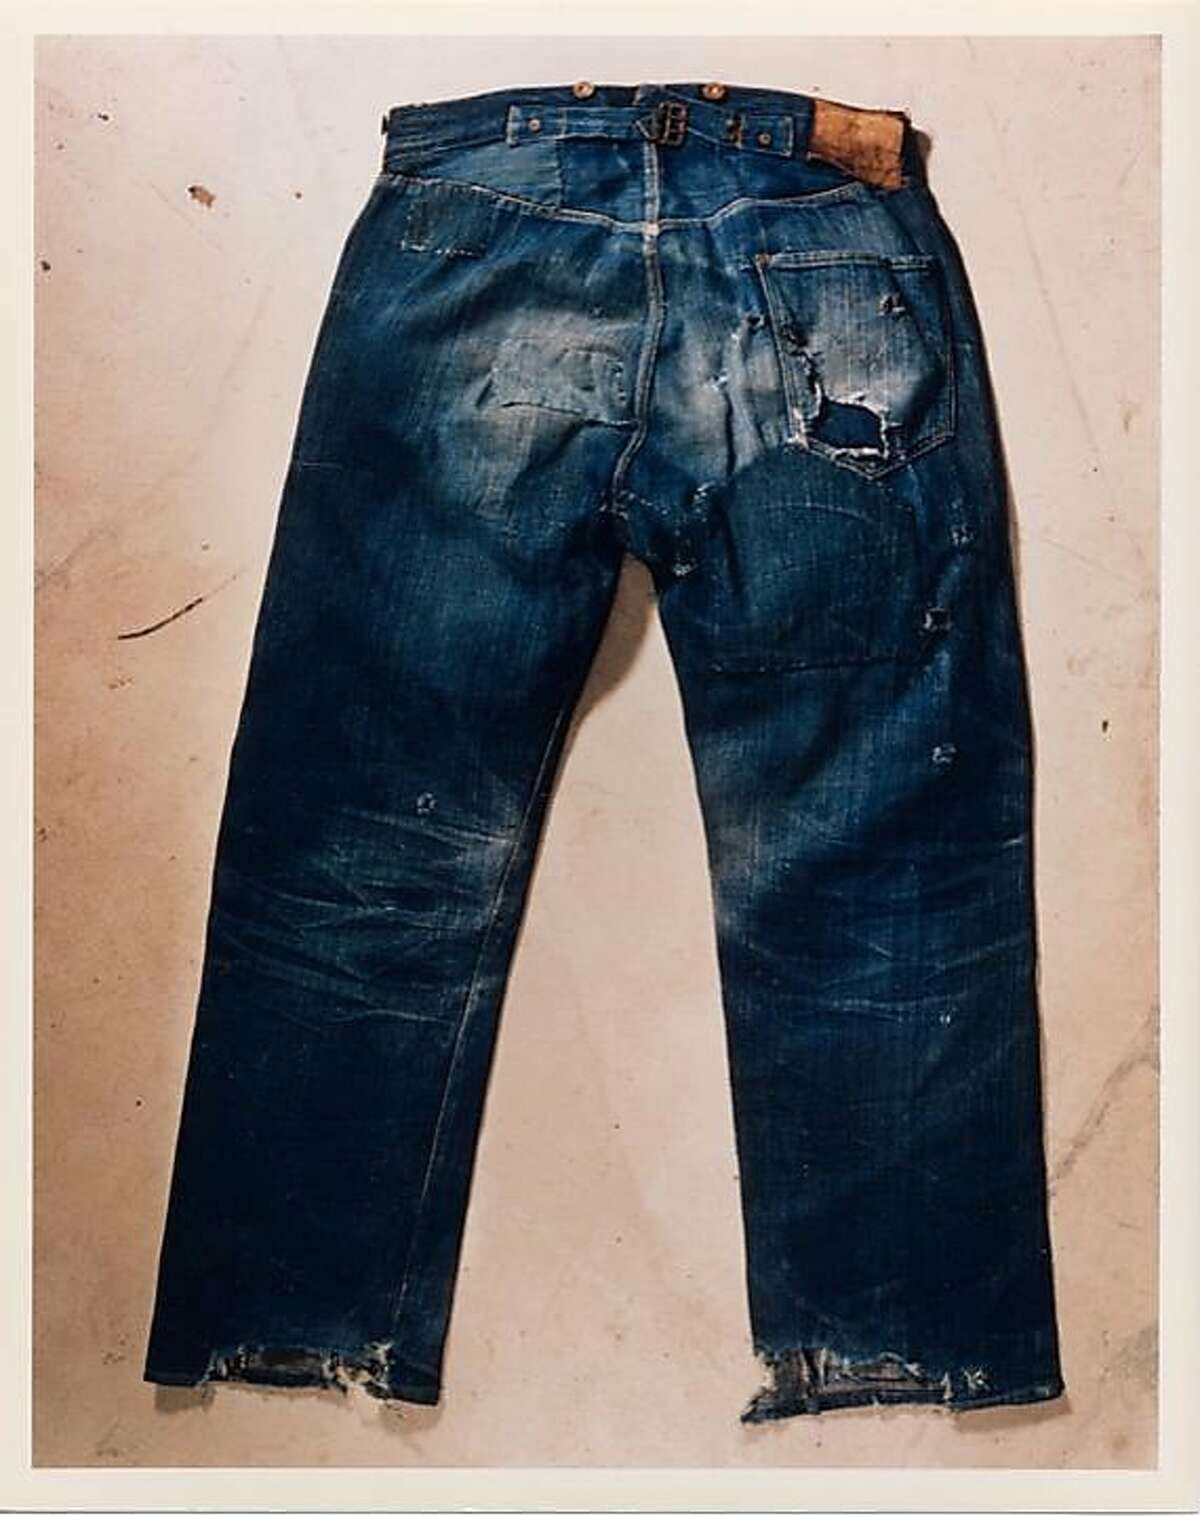 Pivotal points in denim's history